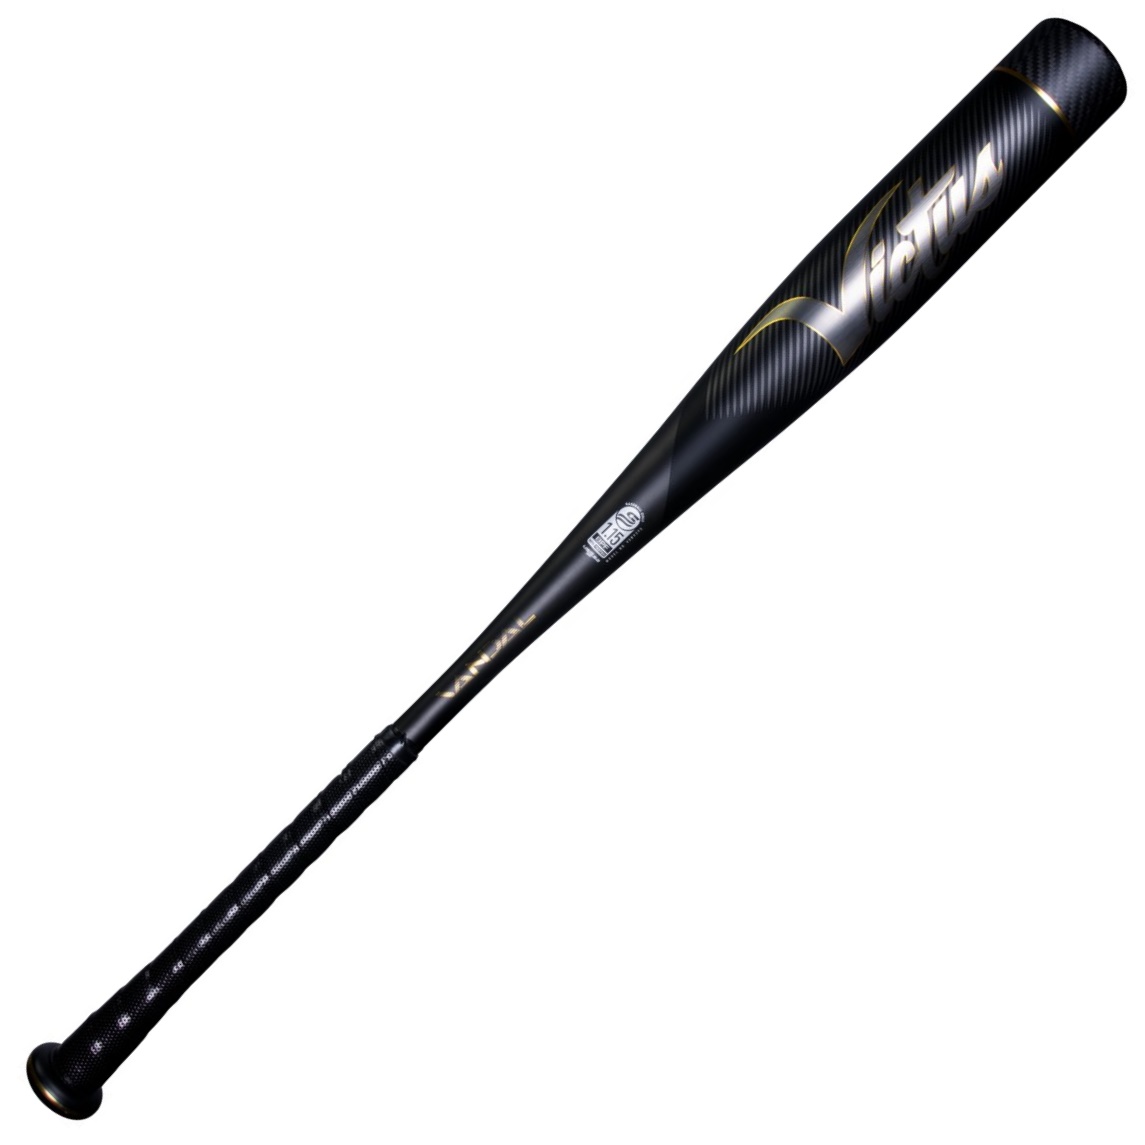 victus-vandal-2-bbcor-2022-baseball-bat-33-inch-30-oz VCBV2-3330 Victus 840078703614 <p>In baseball speed is everything.<br /> <br />That’s why Victus designed the